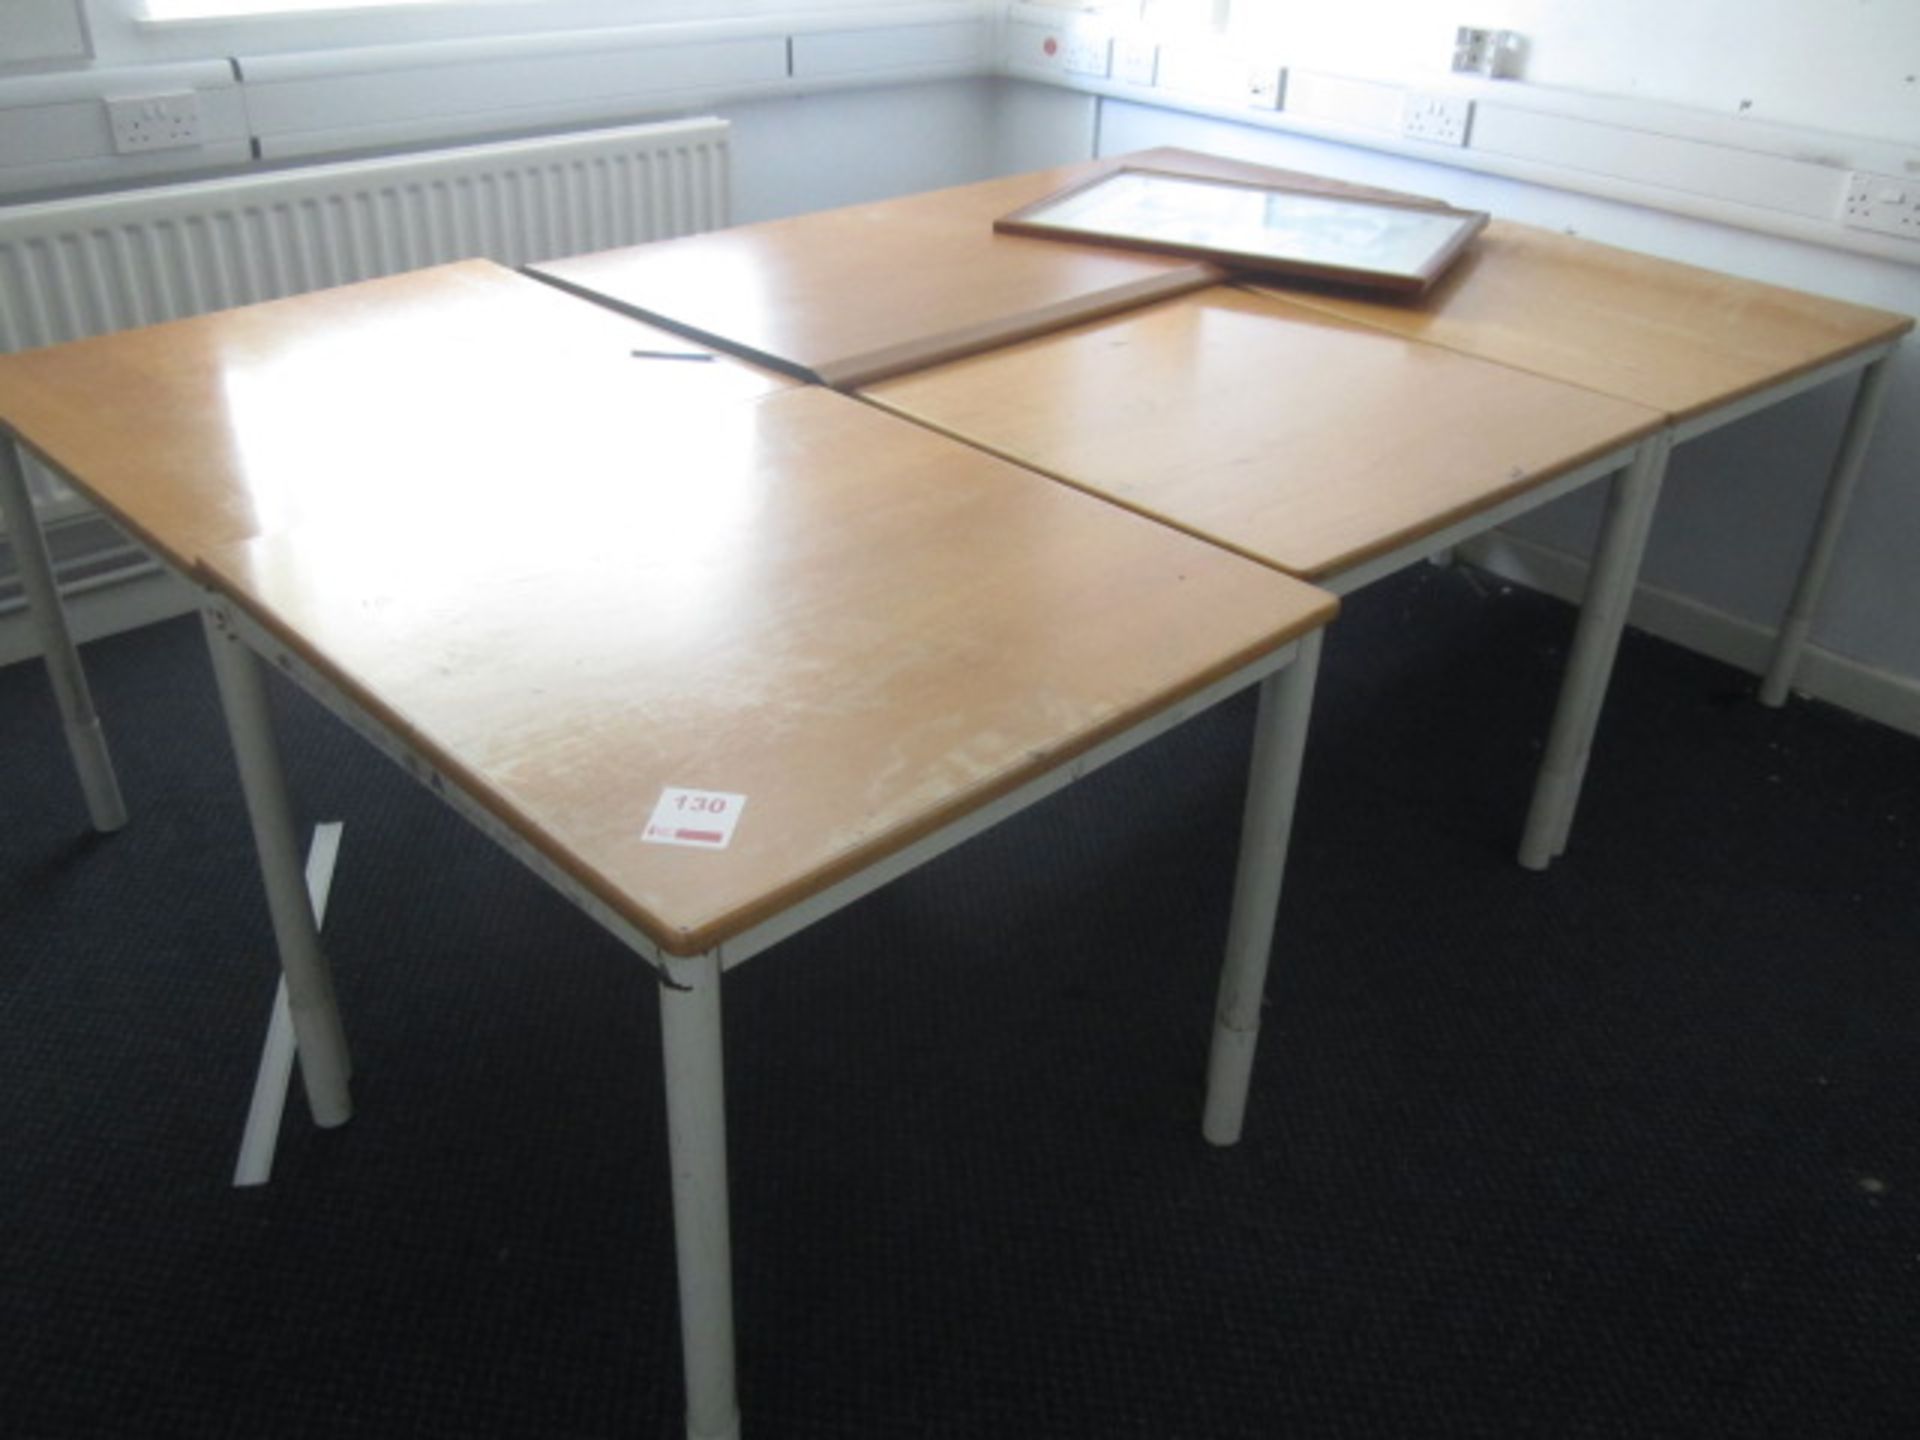 9 x assorted tables, metal 2 drawer filing cabinet, - please note located on 1st floor, some table